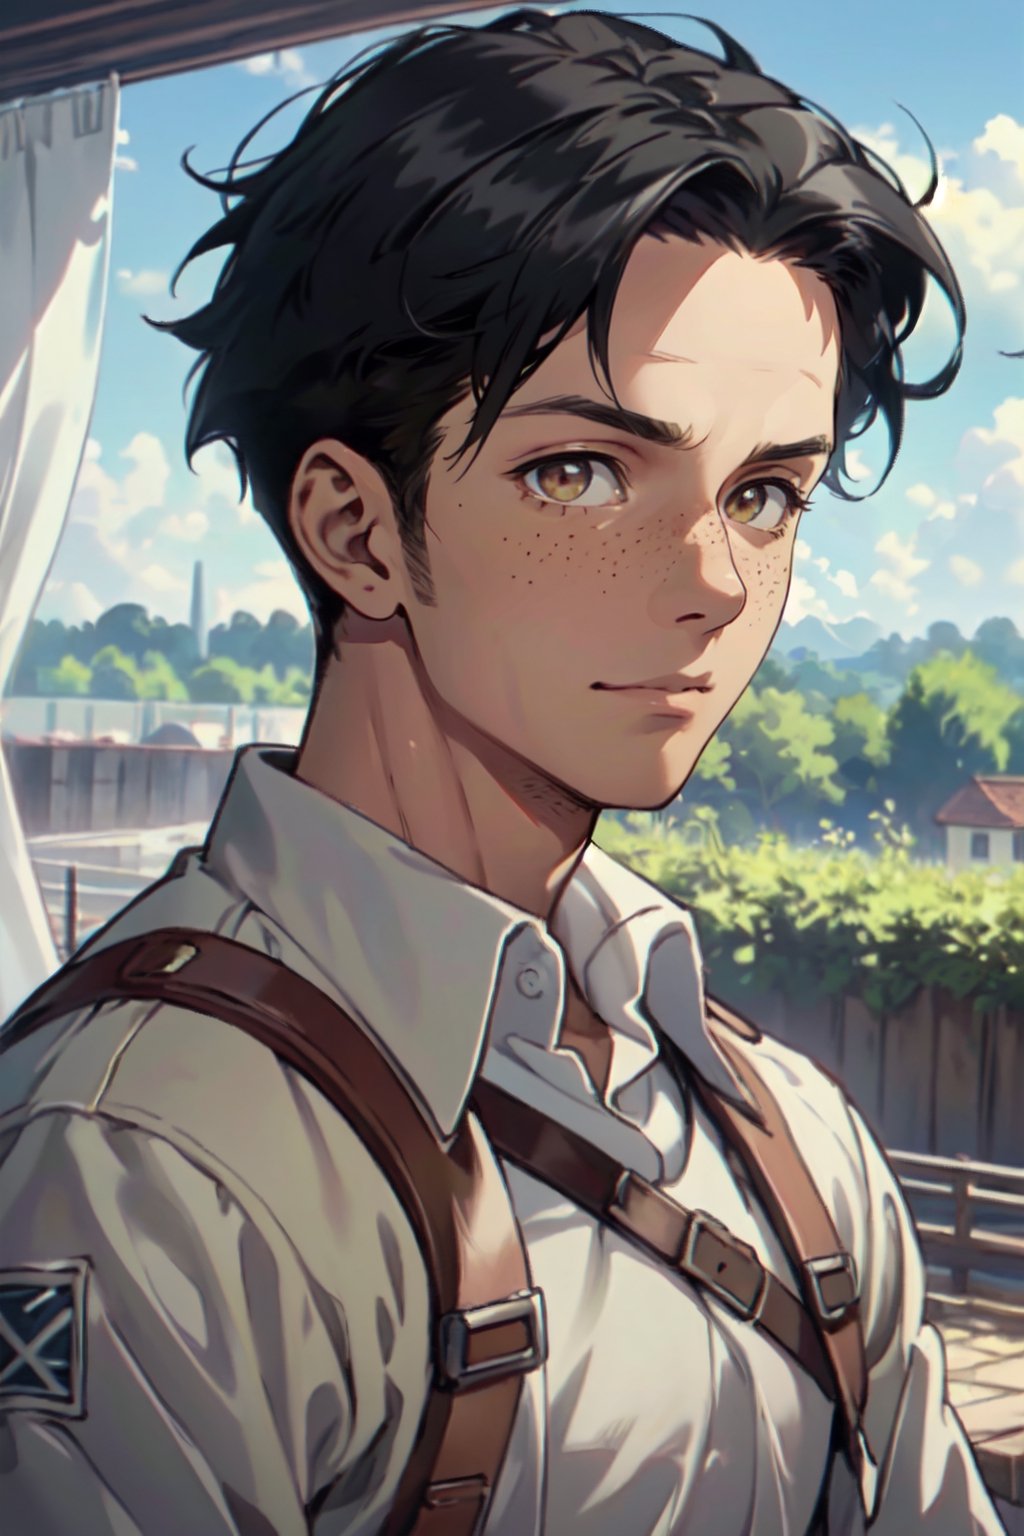 Marco Bodt, (short hair:1.2) (black hair, center-parted short hair, very short curtained hair:1.2), (bare forehead:1.2), (light brown eyes, normal size eyes), wearing pure white collared shirt, freckles, handsome, charming, alluring, friendly, (standing), (upper body in frame), simple background, green plains, cloudy blue sky, perfect light, only1 image, perfect anatomy, perfect proportions, perfect perspective, 8k, HQ, (best quality:1.5, hyperrealistic:1.5, photorealistic:1.4, madly detailed CG unity 8k wallpaper:1.5, masterpiece:1.3, madly detailed photo:1.2), (hyper-realistic lifelike texture:1.4, realistic eyes:1.2), picture-perfect face, perfect eye pupil, detailed eyes, realistic, HD, UHD, (front view:1.2), portrait, looking outside frame, AttackonTitan